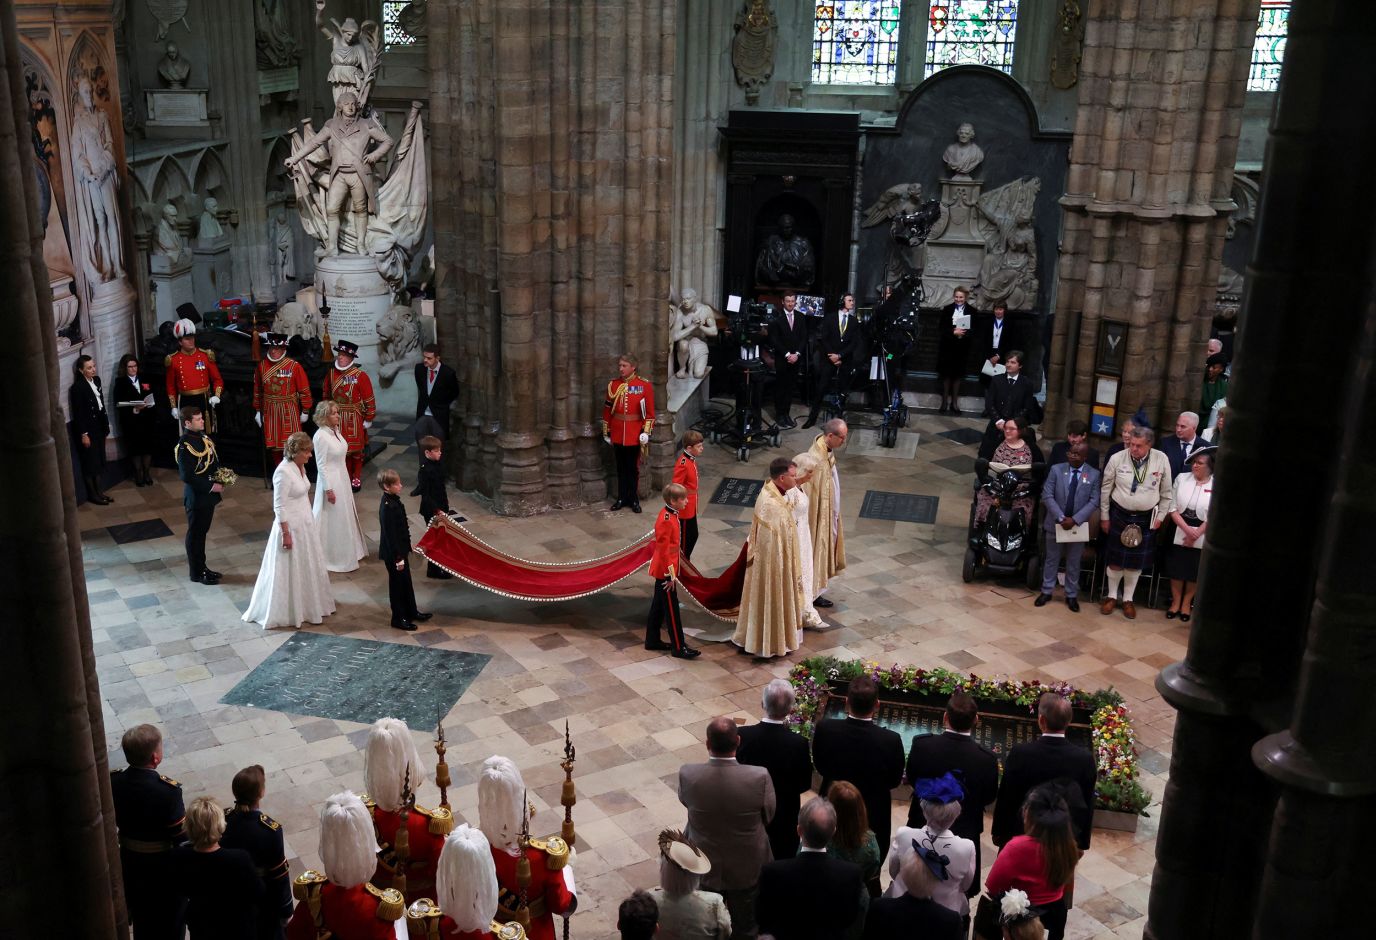 The Queen enters Westminster Abbey. The King and Queen <a href='https://www.cnn.com/uk/live-news/king-charles-iii-coronation-ckc-intl-gbr/h_94f8991ad84c43b4548be766efd7779c' target='_blank'>entered the Abbey</a> to the strains of 'I was glad,' the stirring coronation anthem written by Hubert Parry for the coronation of King Edward VII in 1902. It has been sung at all coronations since then.